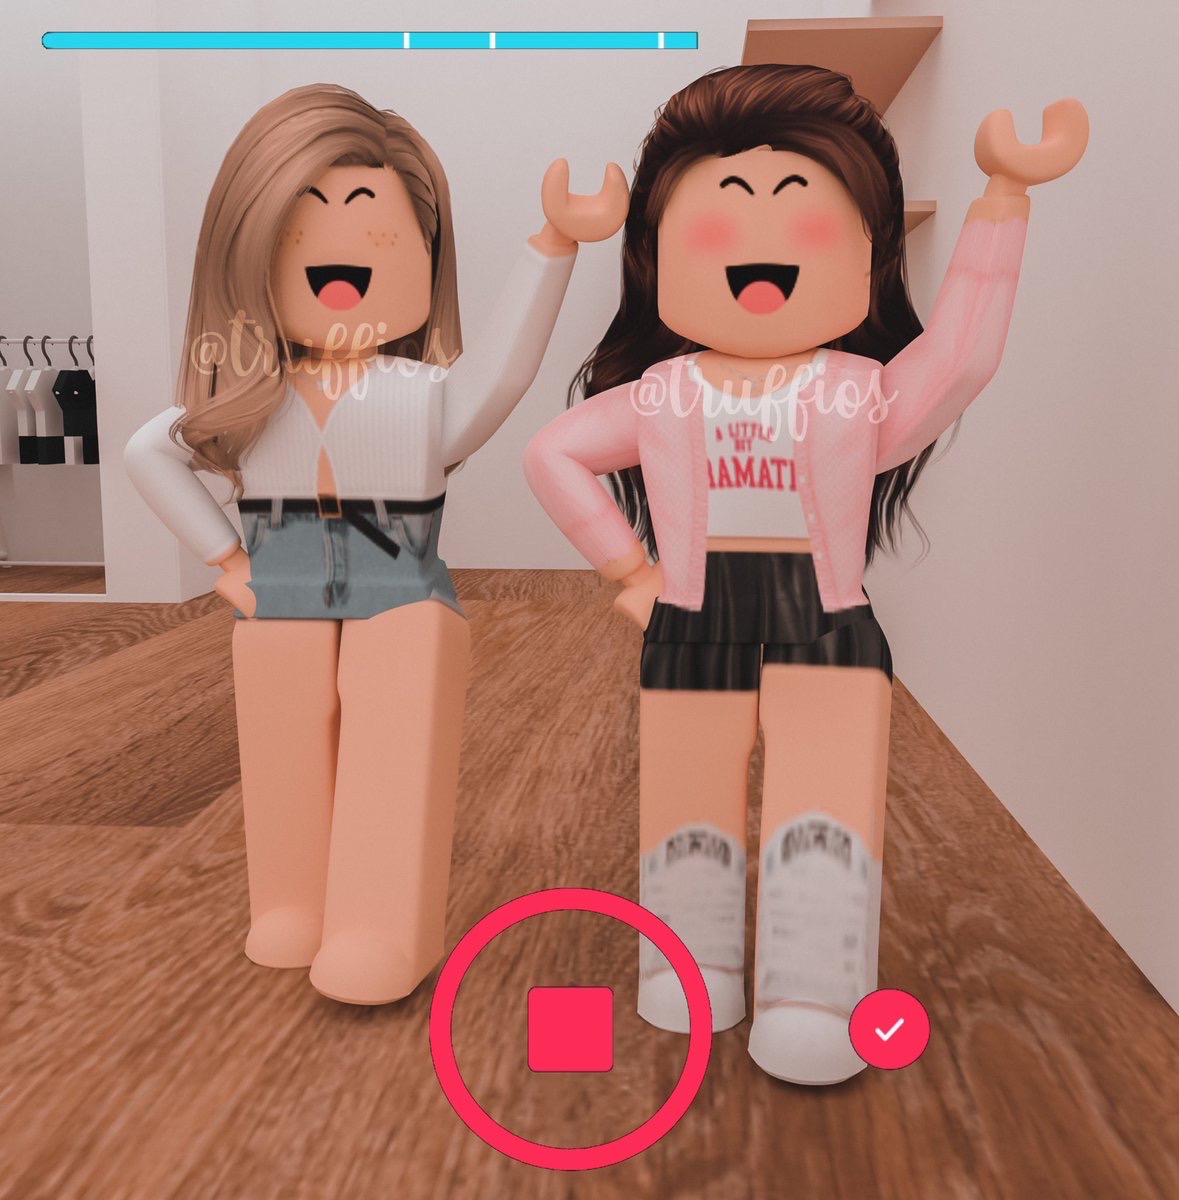 Aesthetic Cute Roblox Girl Image By 𝘊𝘩𝘦𝘳𝘳𝘺 - female cool roblox avatars